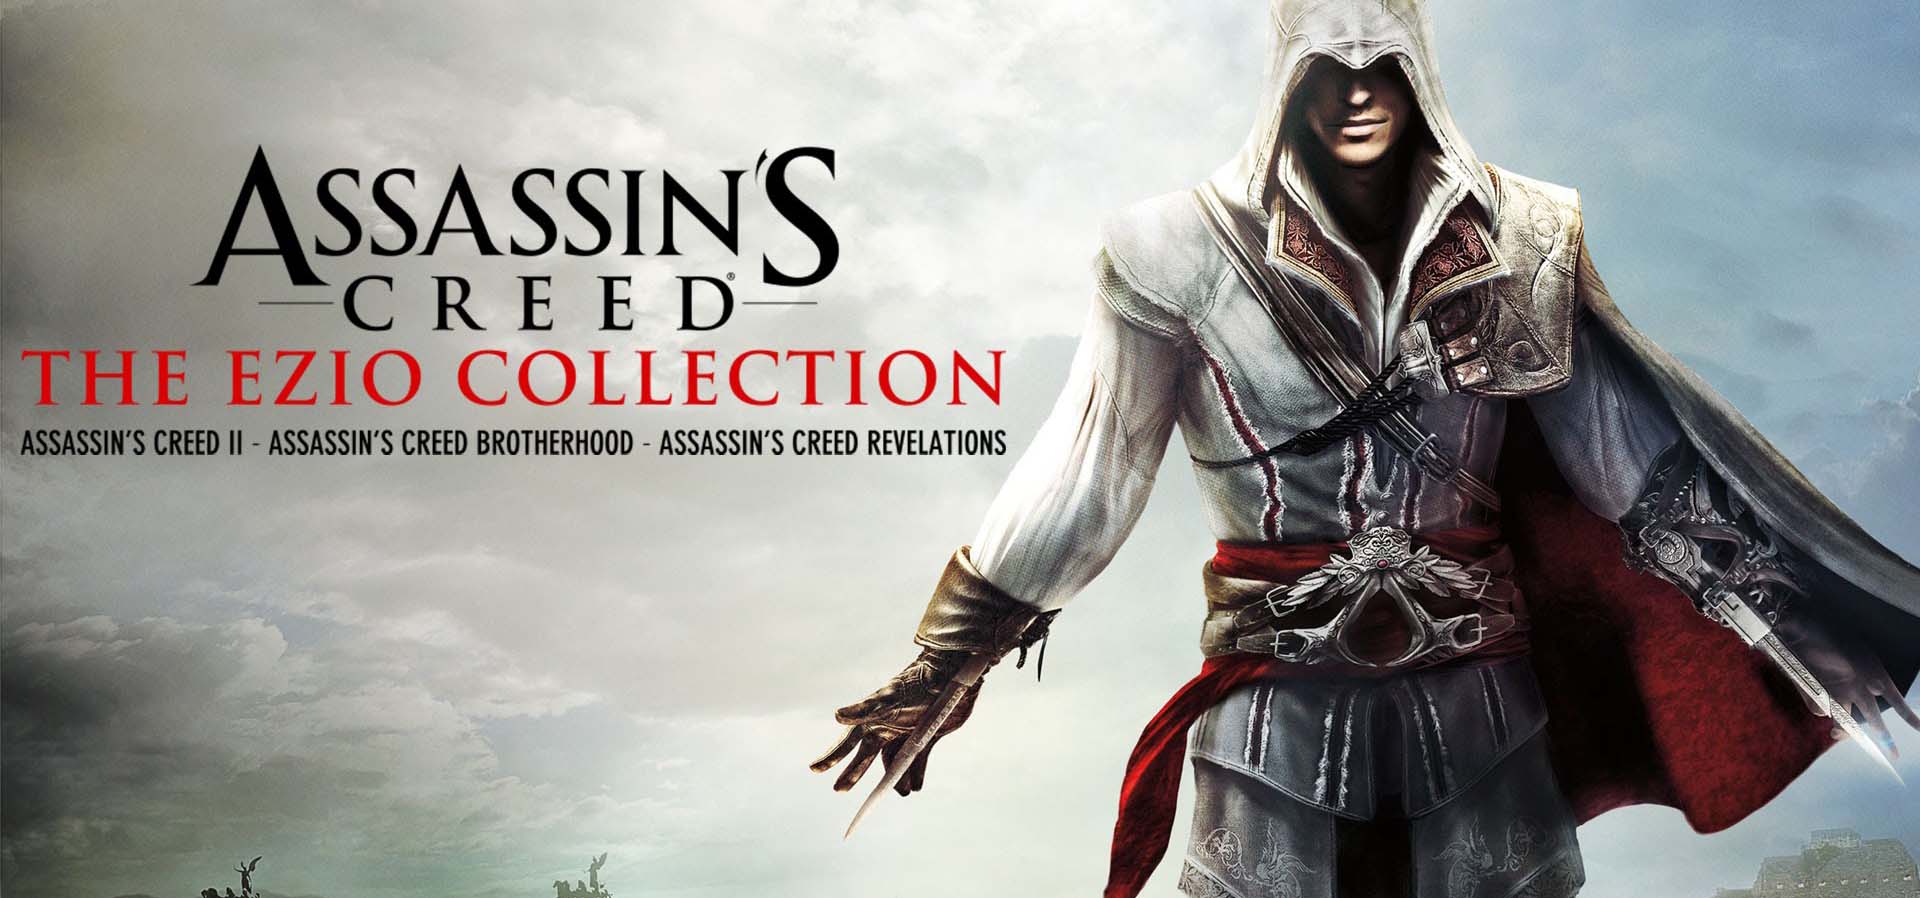 Assassin’s Creed: The Ezio Collection rumoured for Nintendo Switch